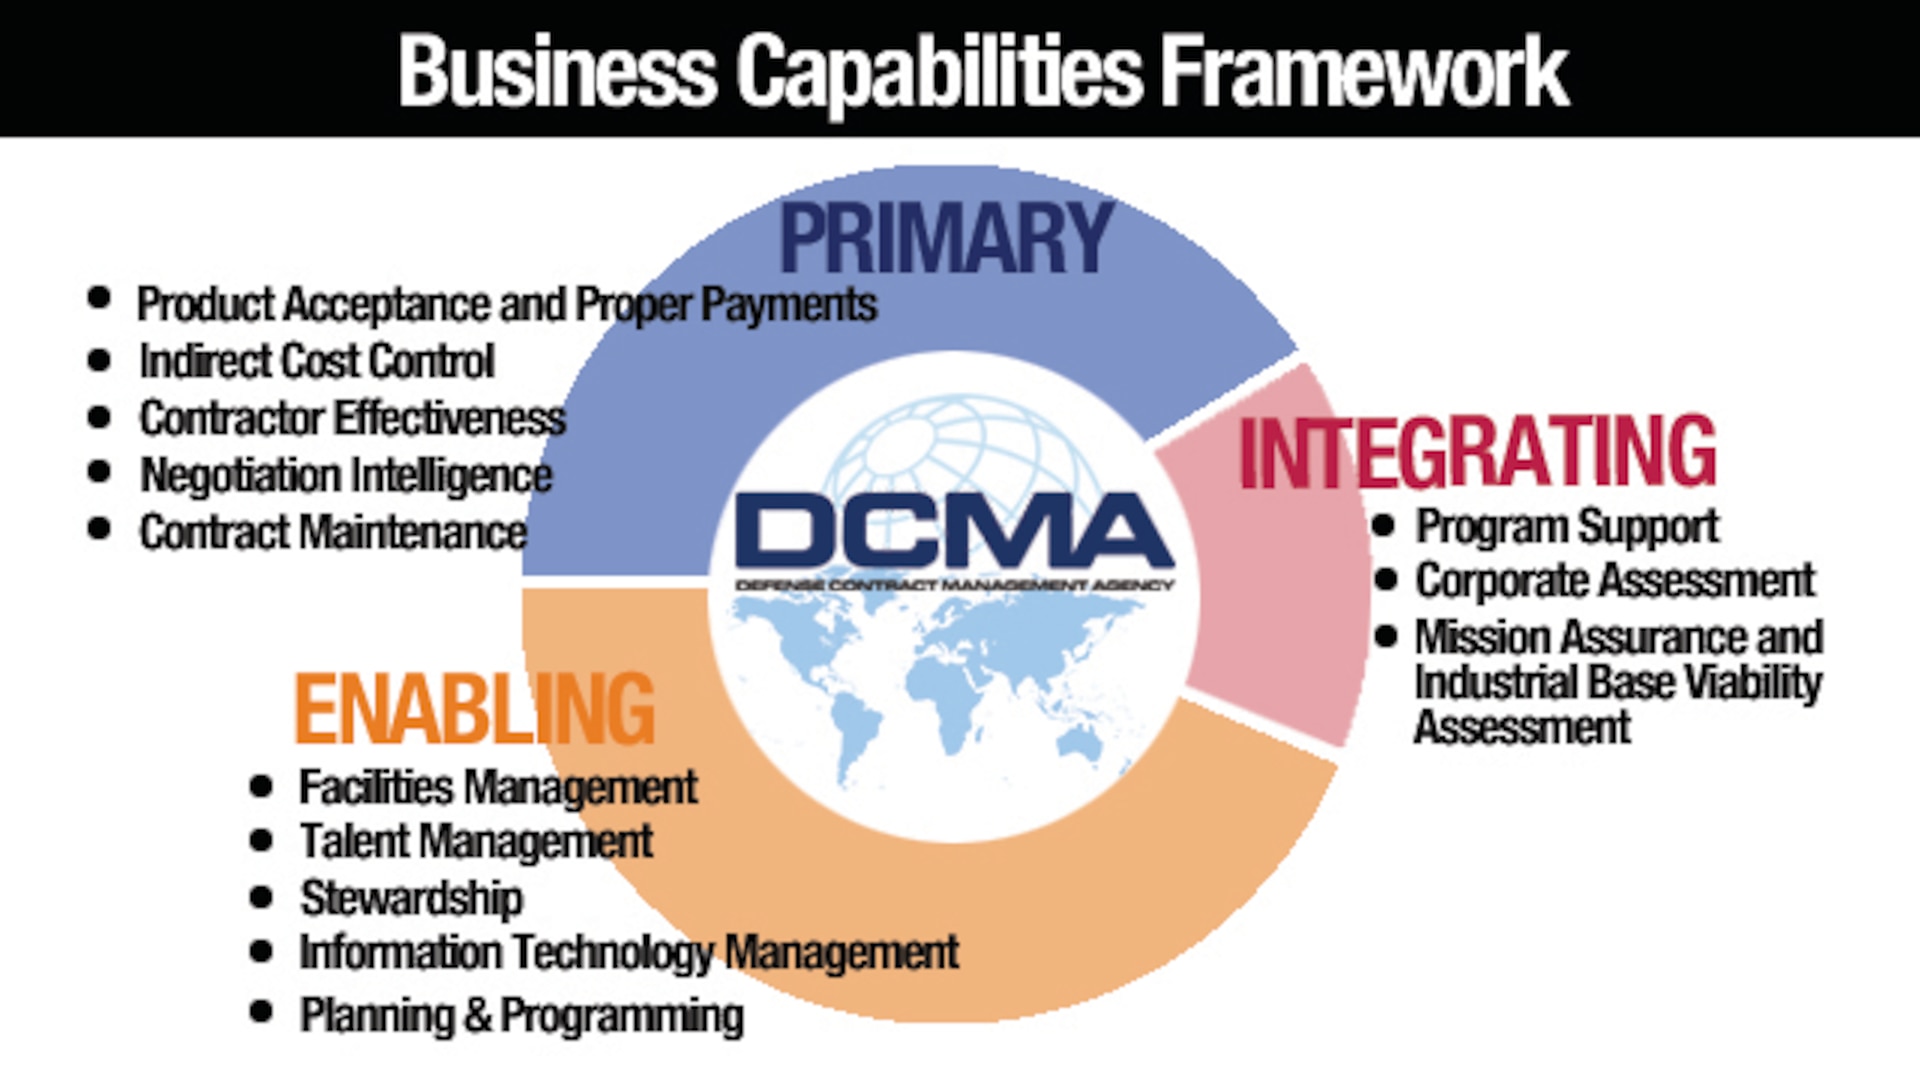 DCMA developed the Business Capabilities Framework to better capture the agency’s return on investment to a more integrated model focusing on the organization’s products, including acquisition risk reduction and transaction support. (DCMA graphic by Cheryl Jamieson)

